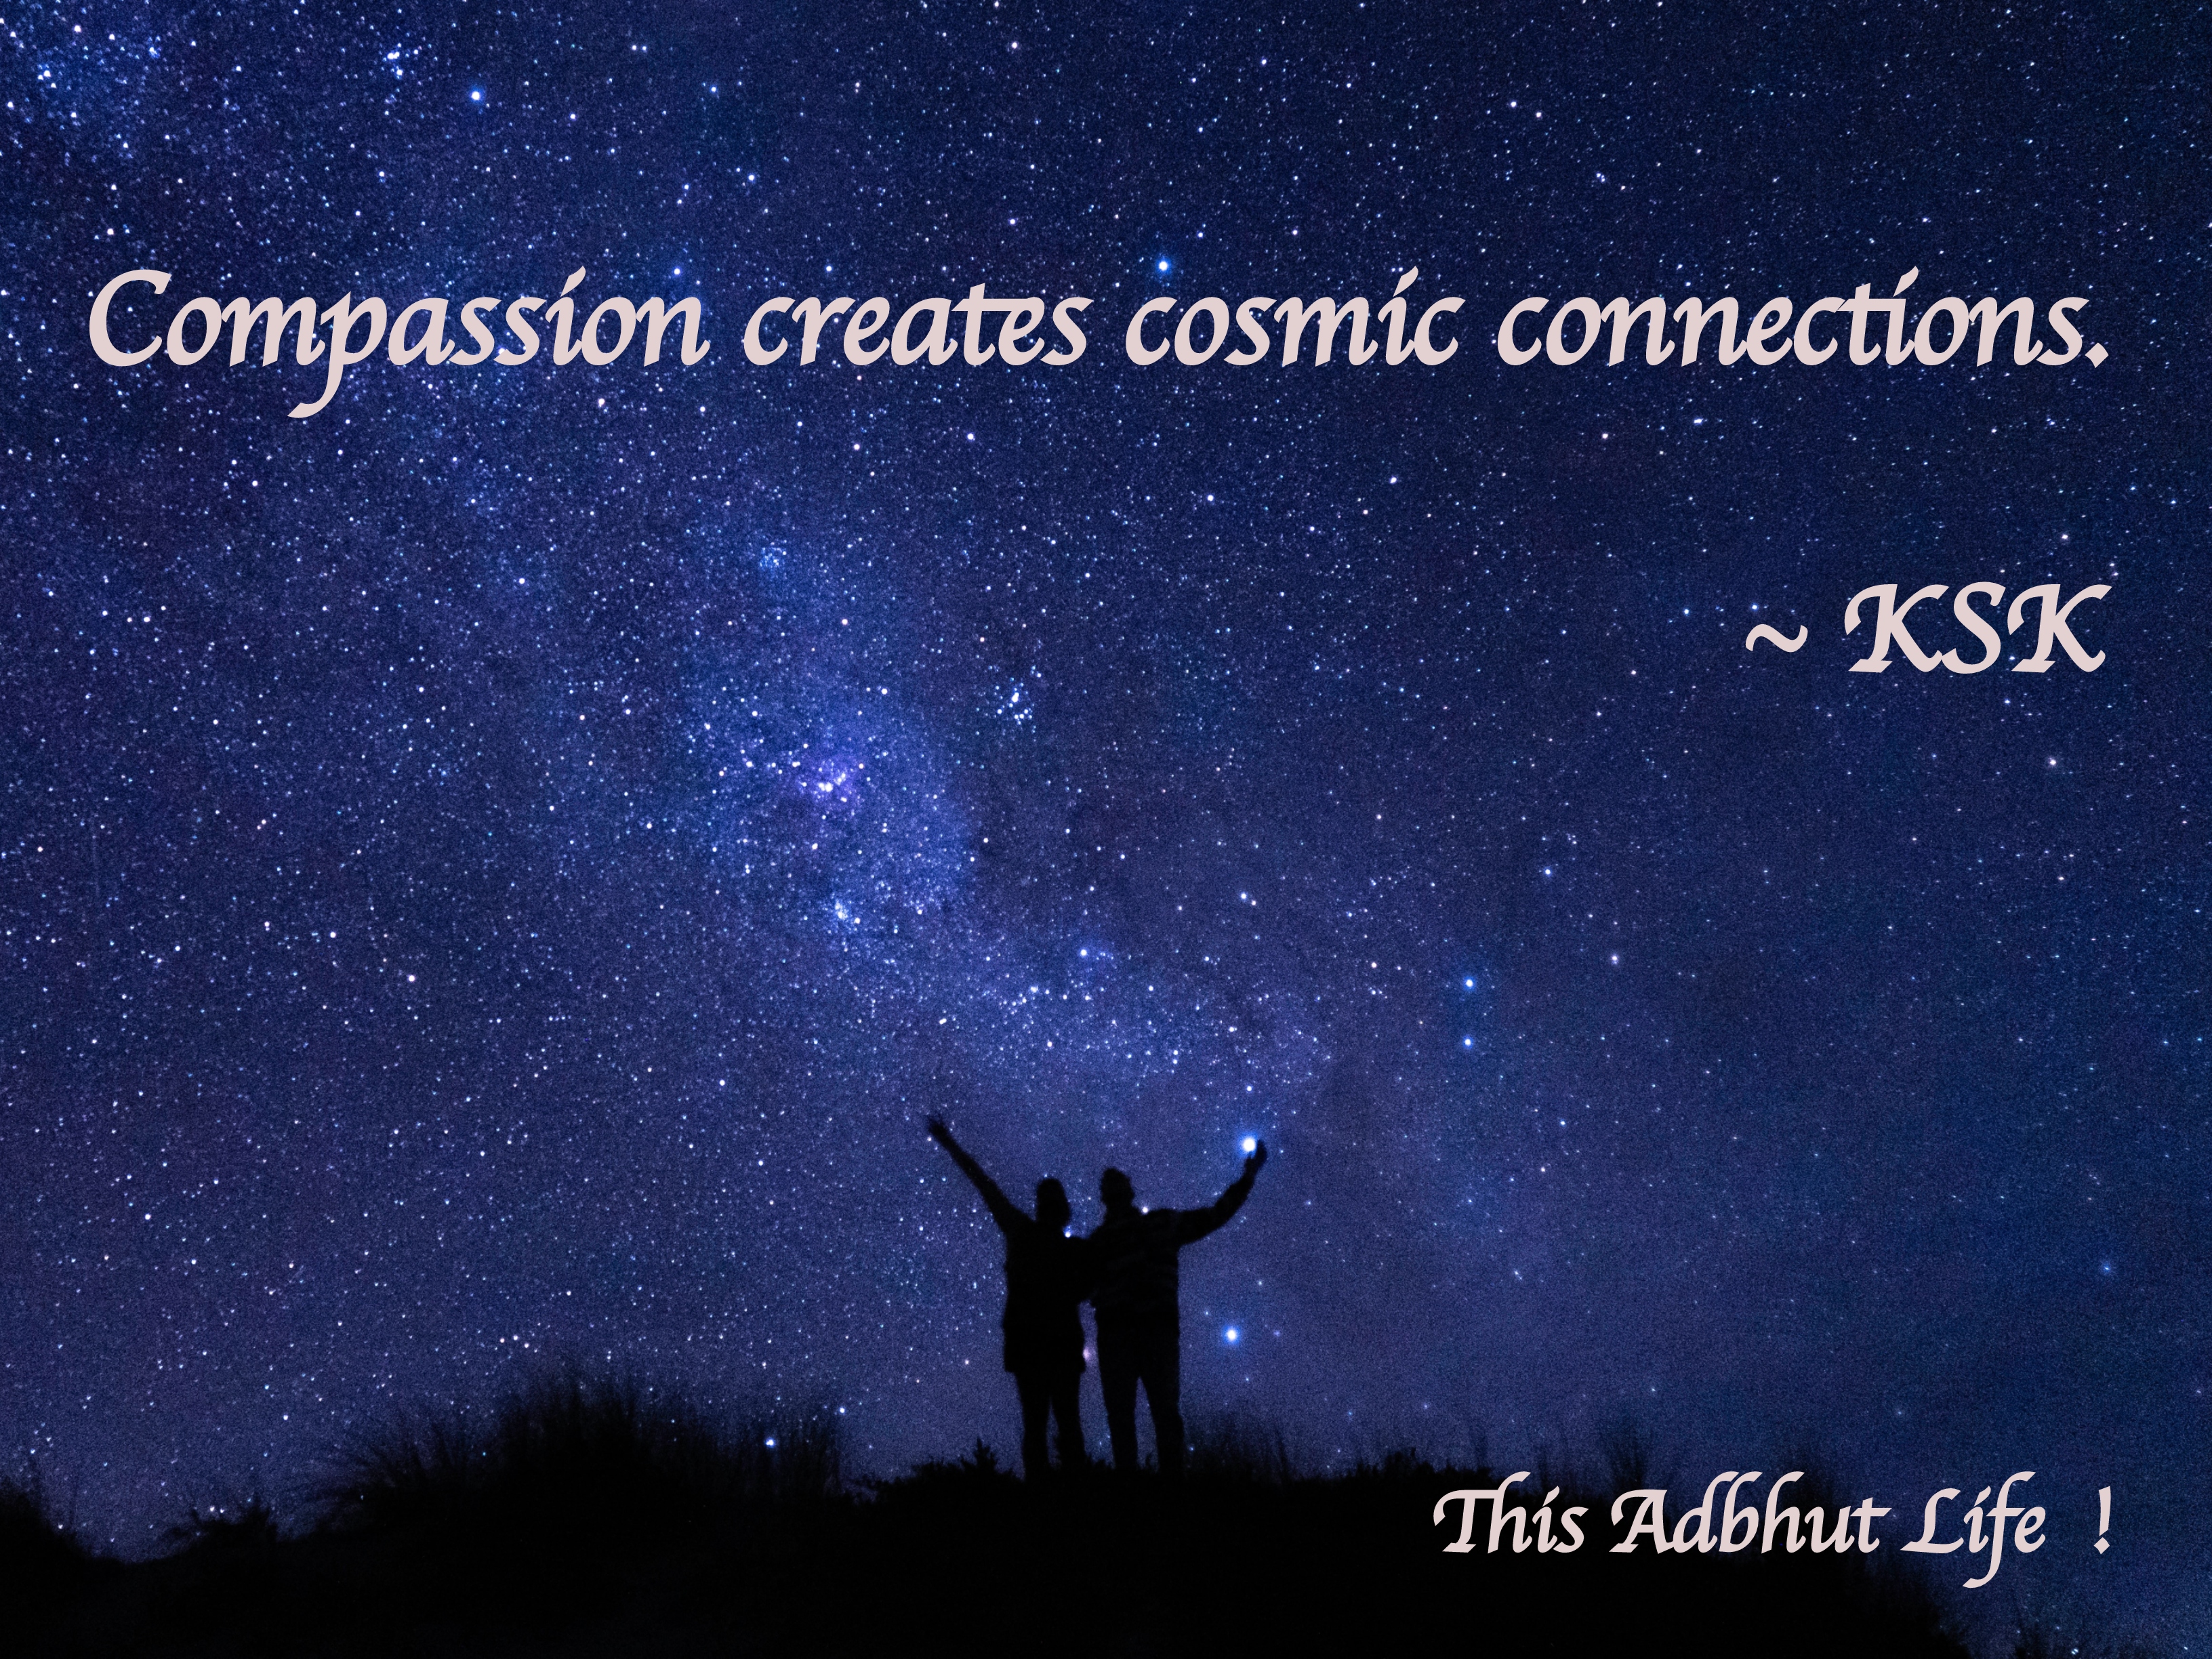 Compassion, cosmic connections